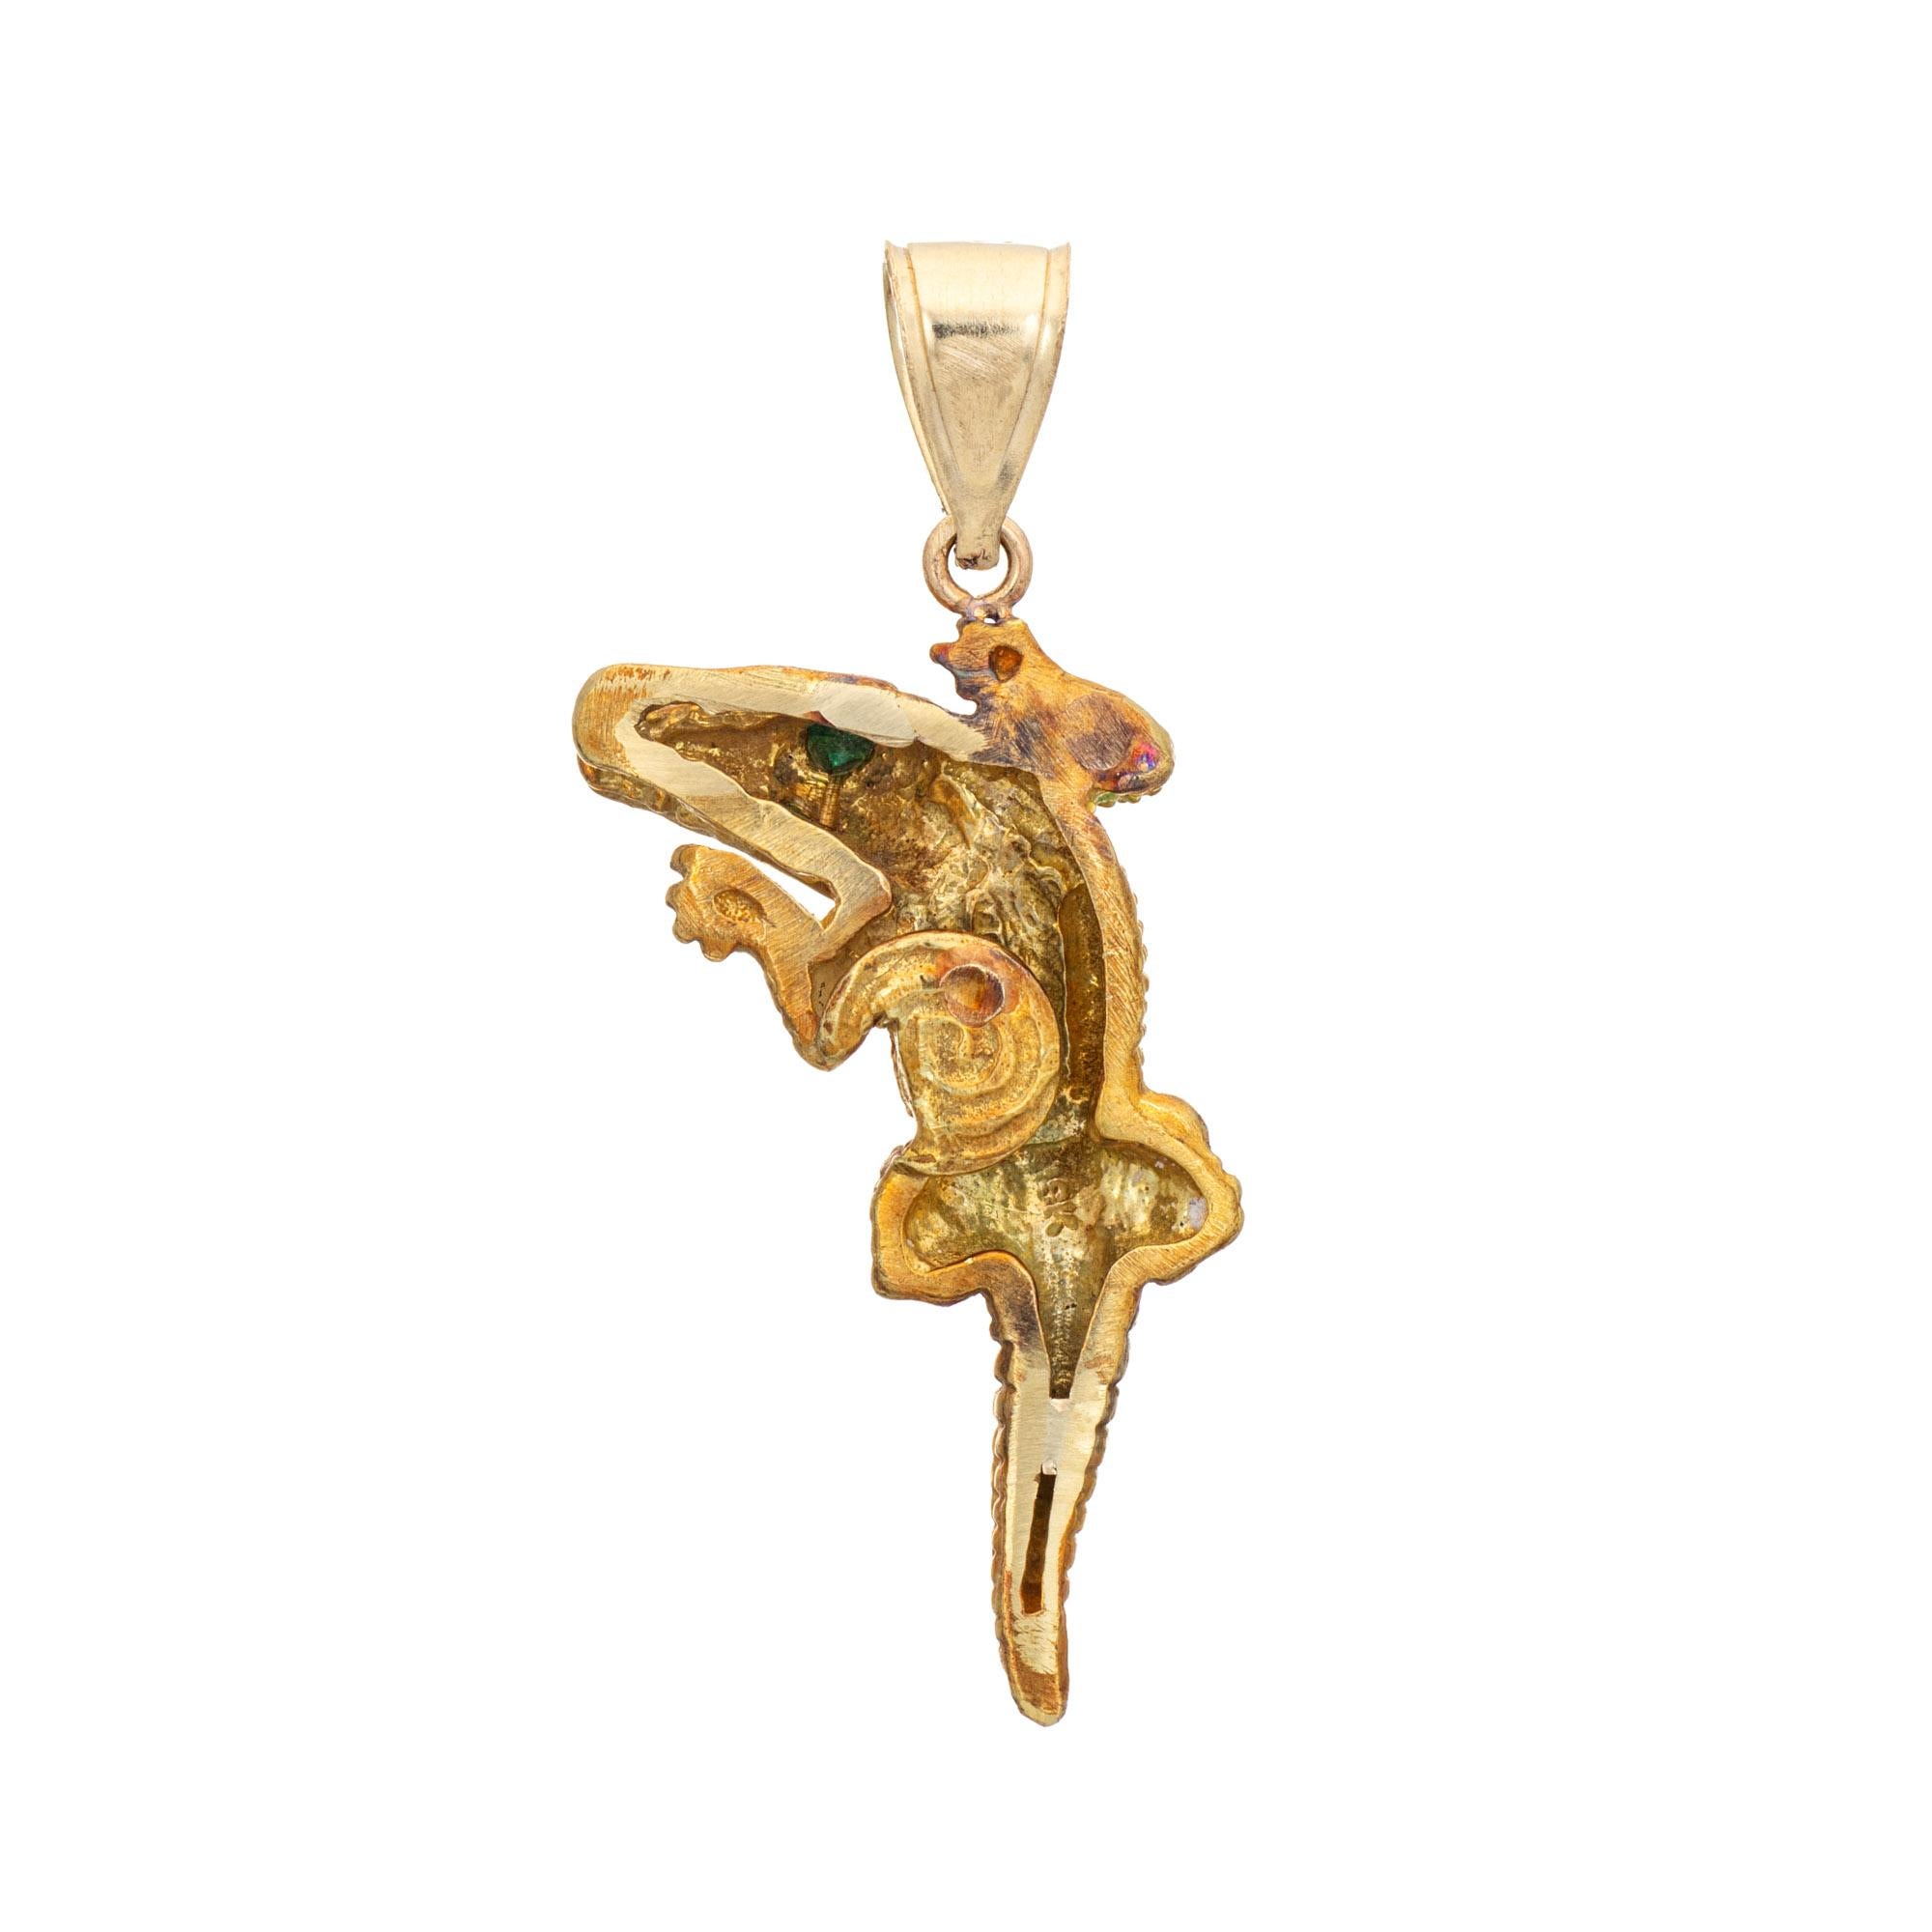 Finely detailed Alligator pendant crafted in 18 karat yellow gold. 

Two small estimated 0.01 carat emeralds are set into the eyes.

The beautifully detailed alligator features lifelike scale detailing, with mouth open and teeth visible. Measuring 1